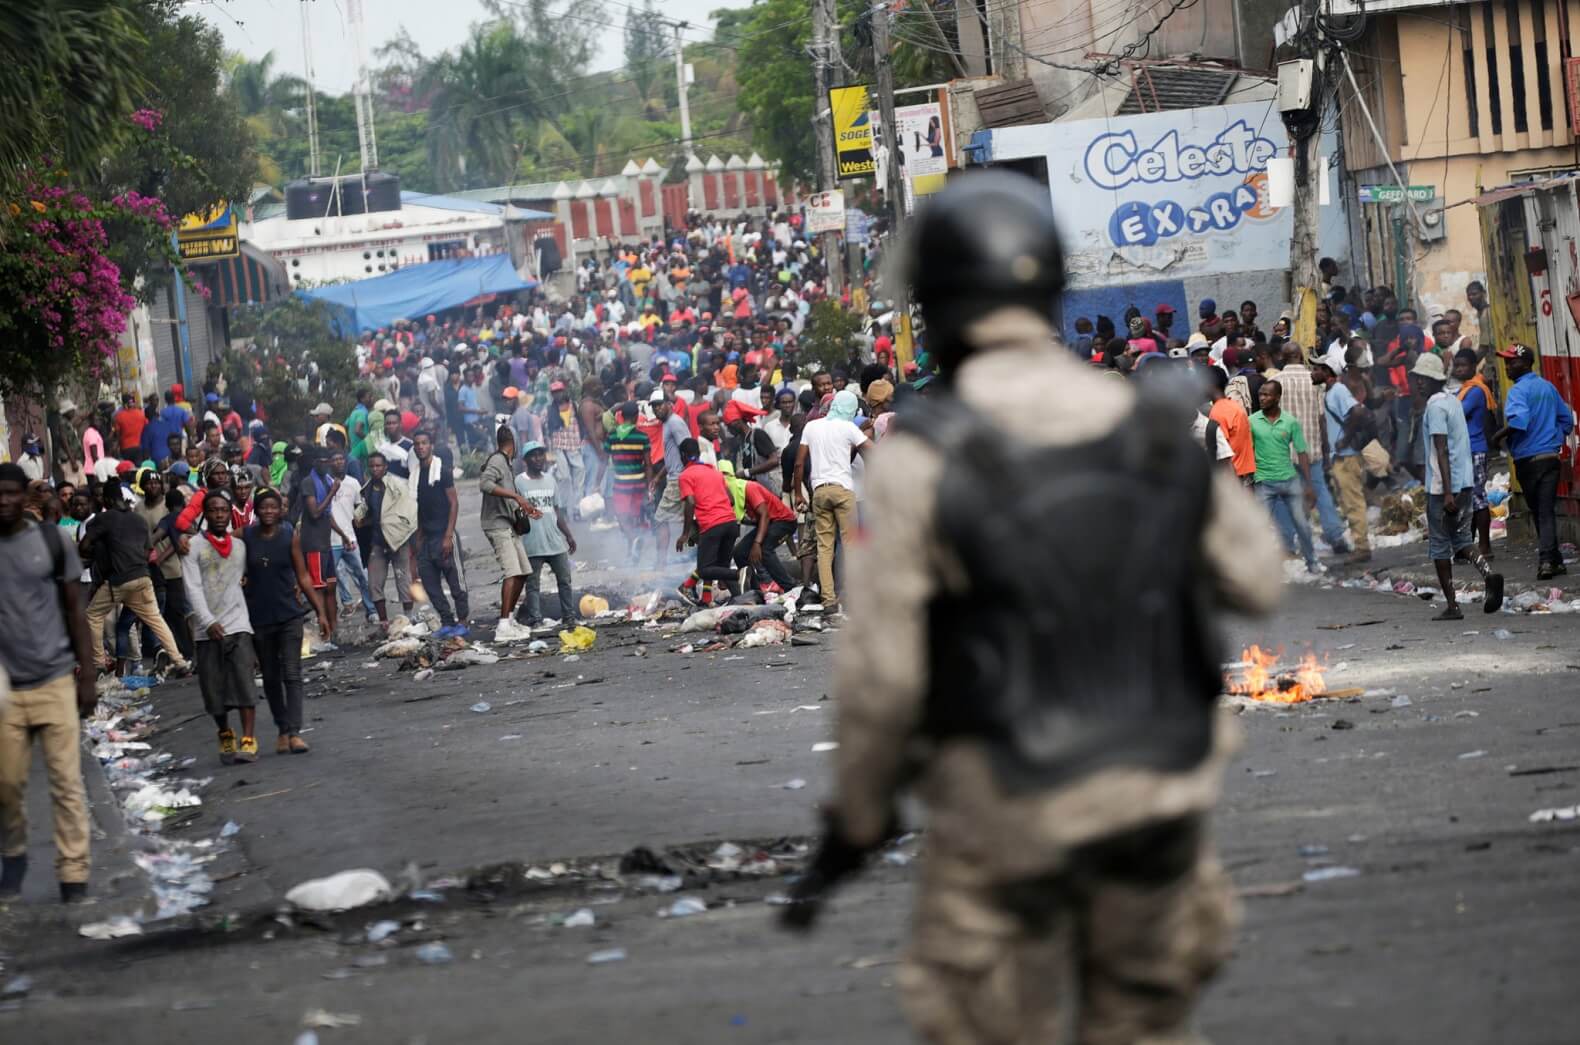 Haiti: 3 Dead as Thousands Protest Against “Alarming” Inflation, Crime